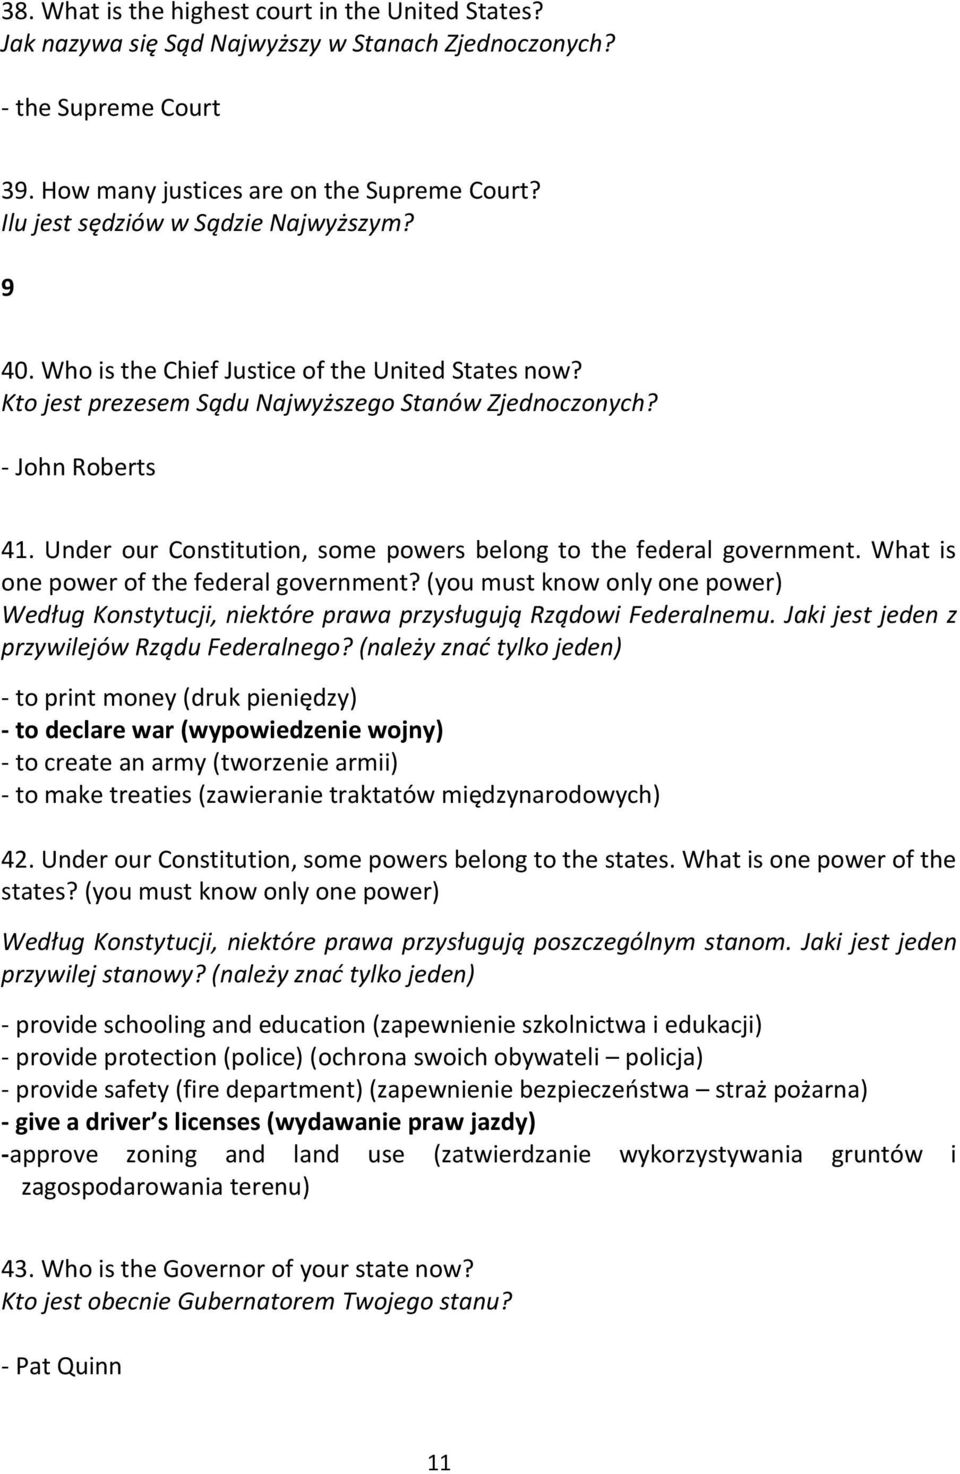 Under our Constitution, some powers belong to the federal government. What is one power of the federal government?